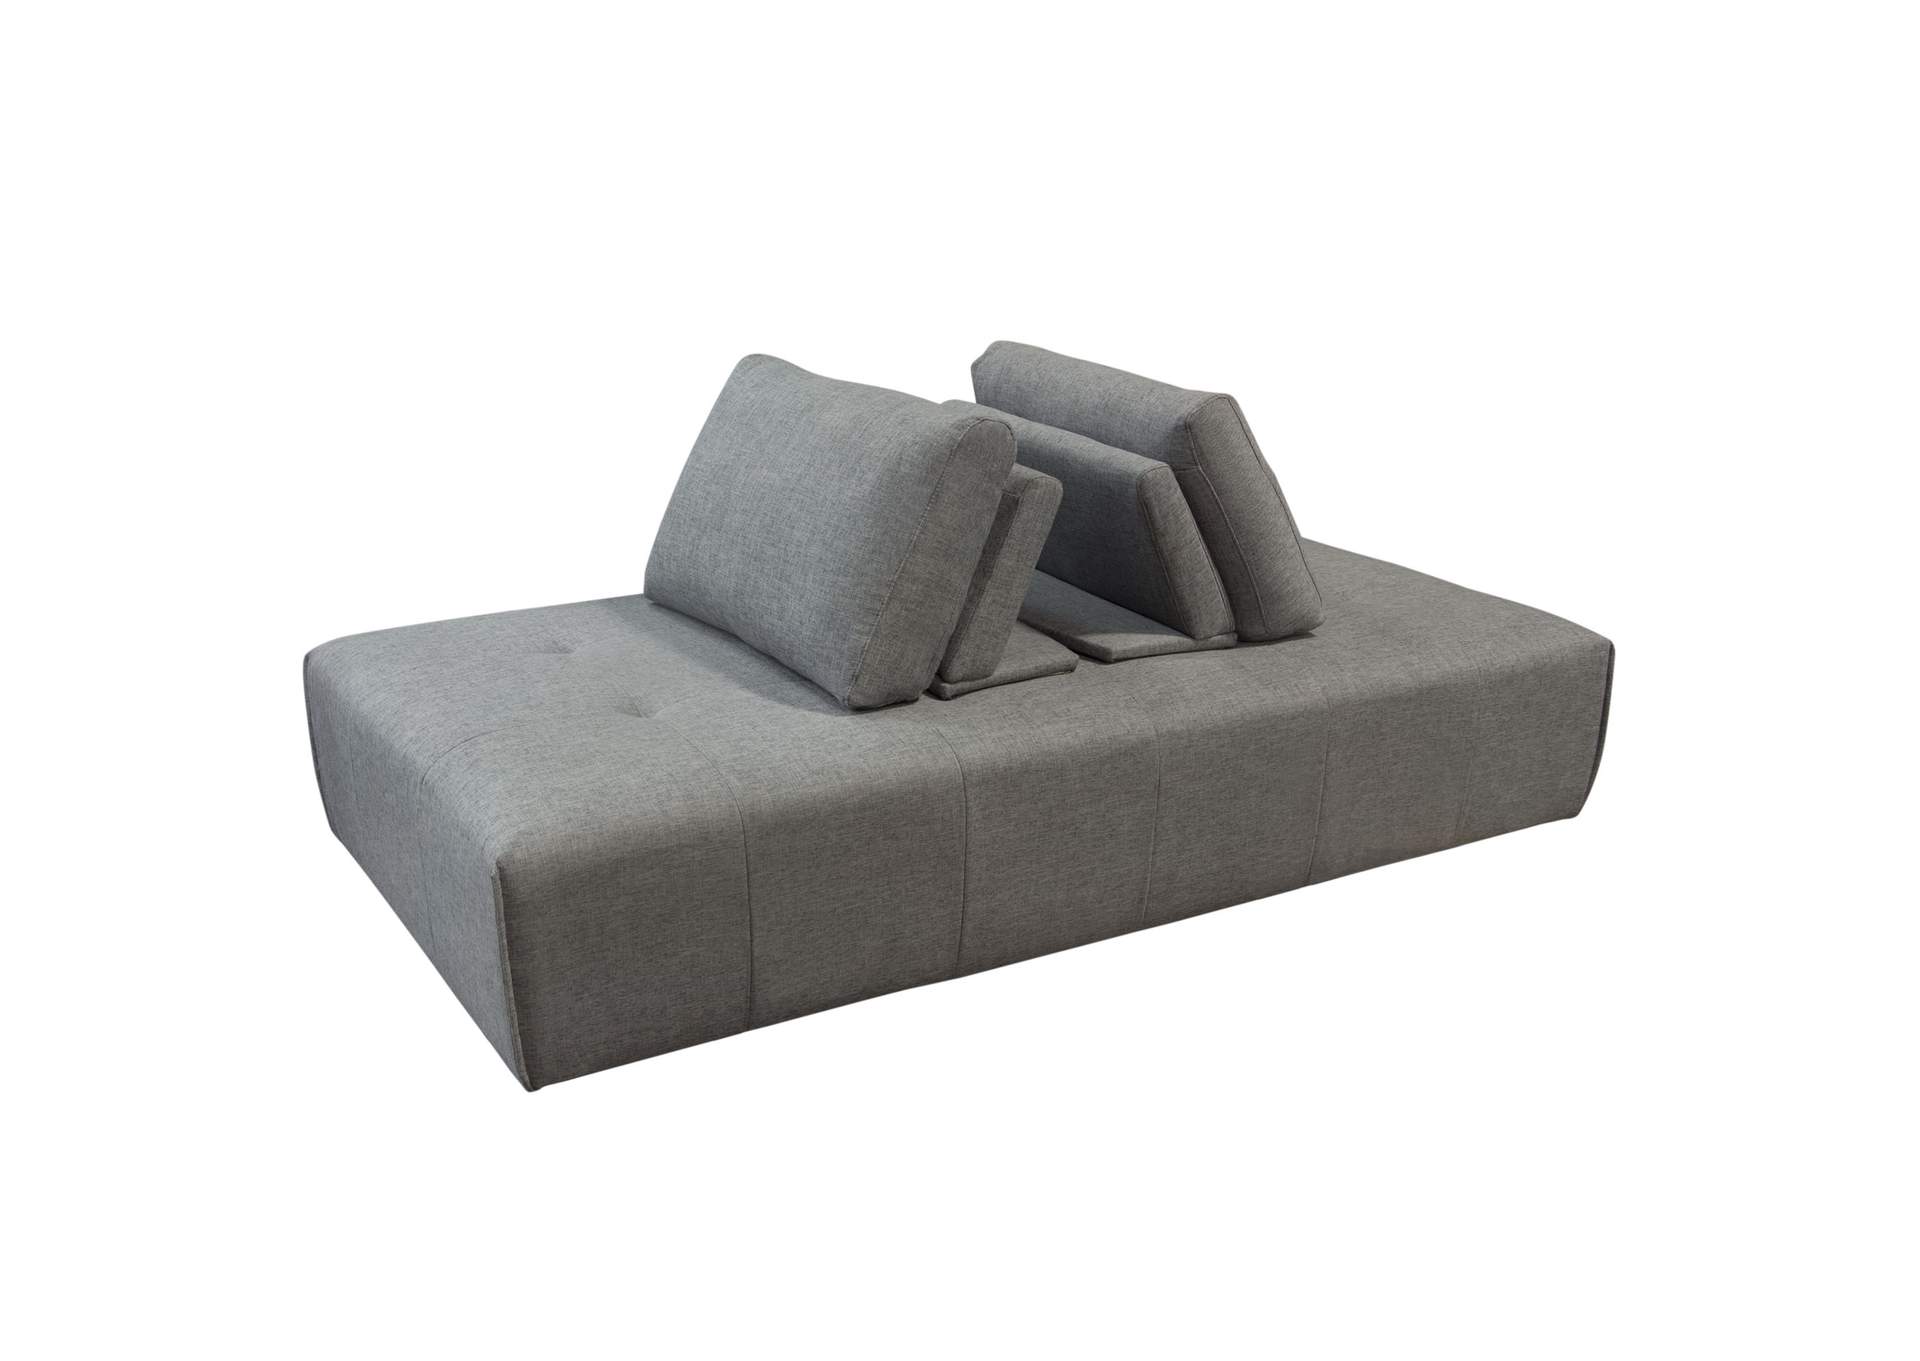 Cloud Lounge Seating Platform with Moveable Backrest Supports in Space Grey Fabric by Diamond Sofa,Diamond Sofa